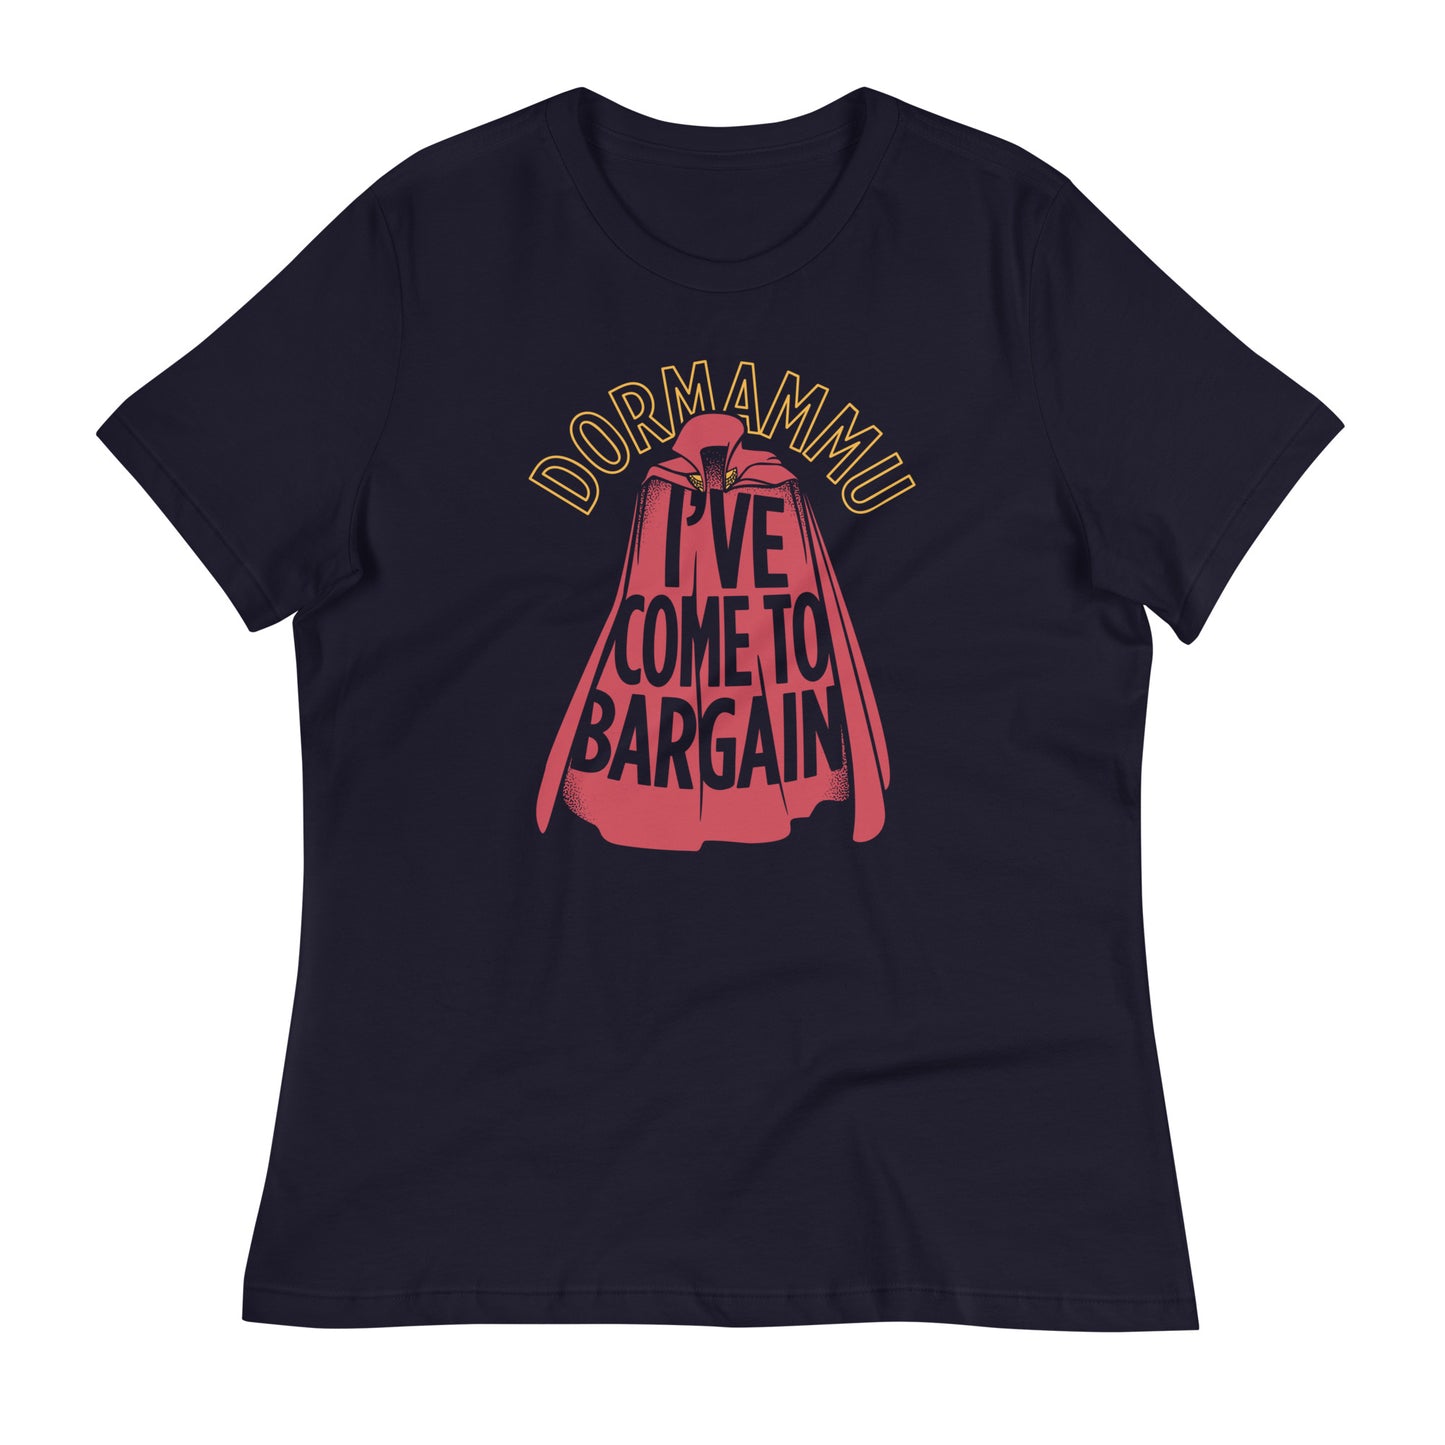 I've Come To Bargain Women's Signature Tee